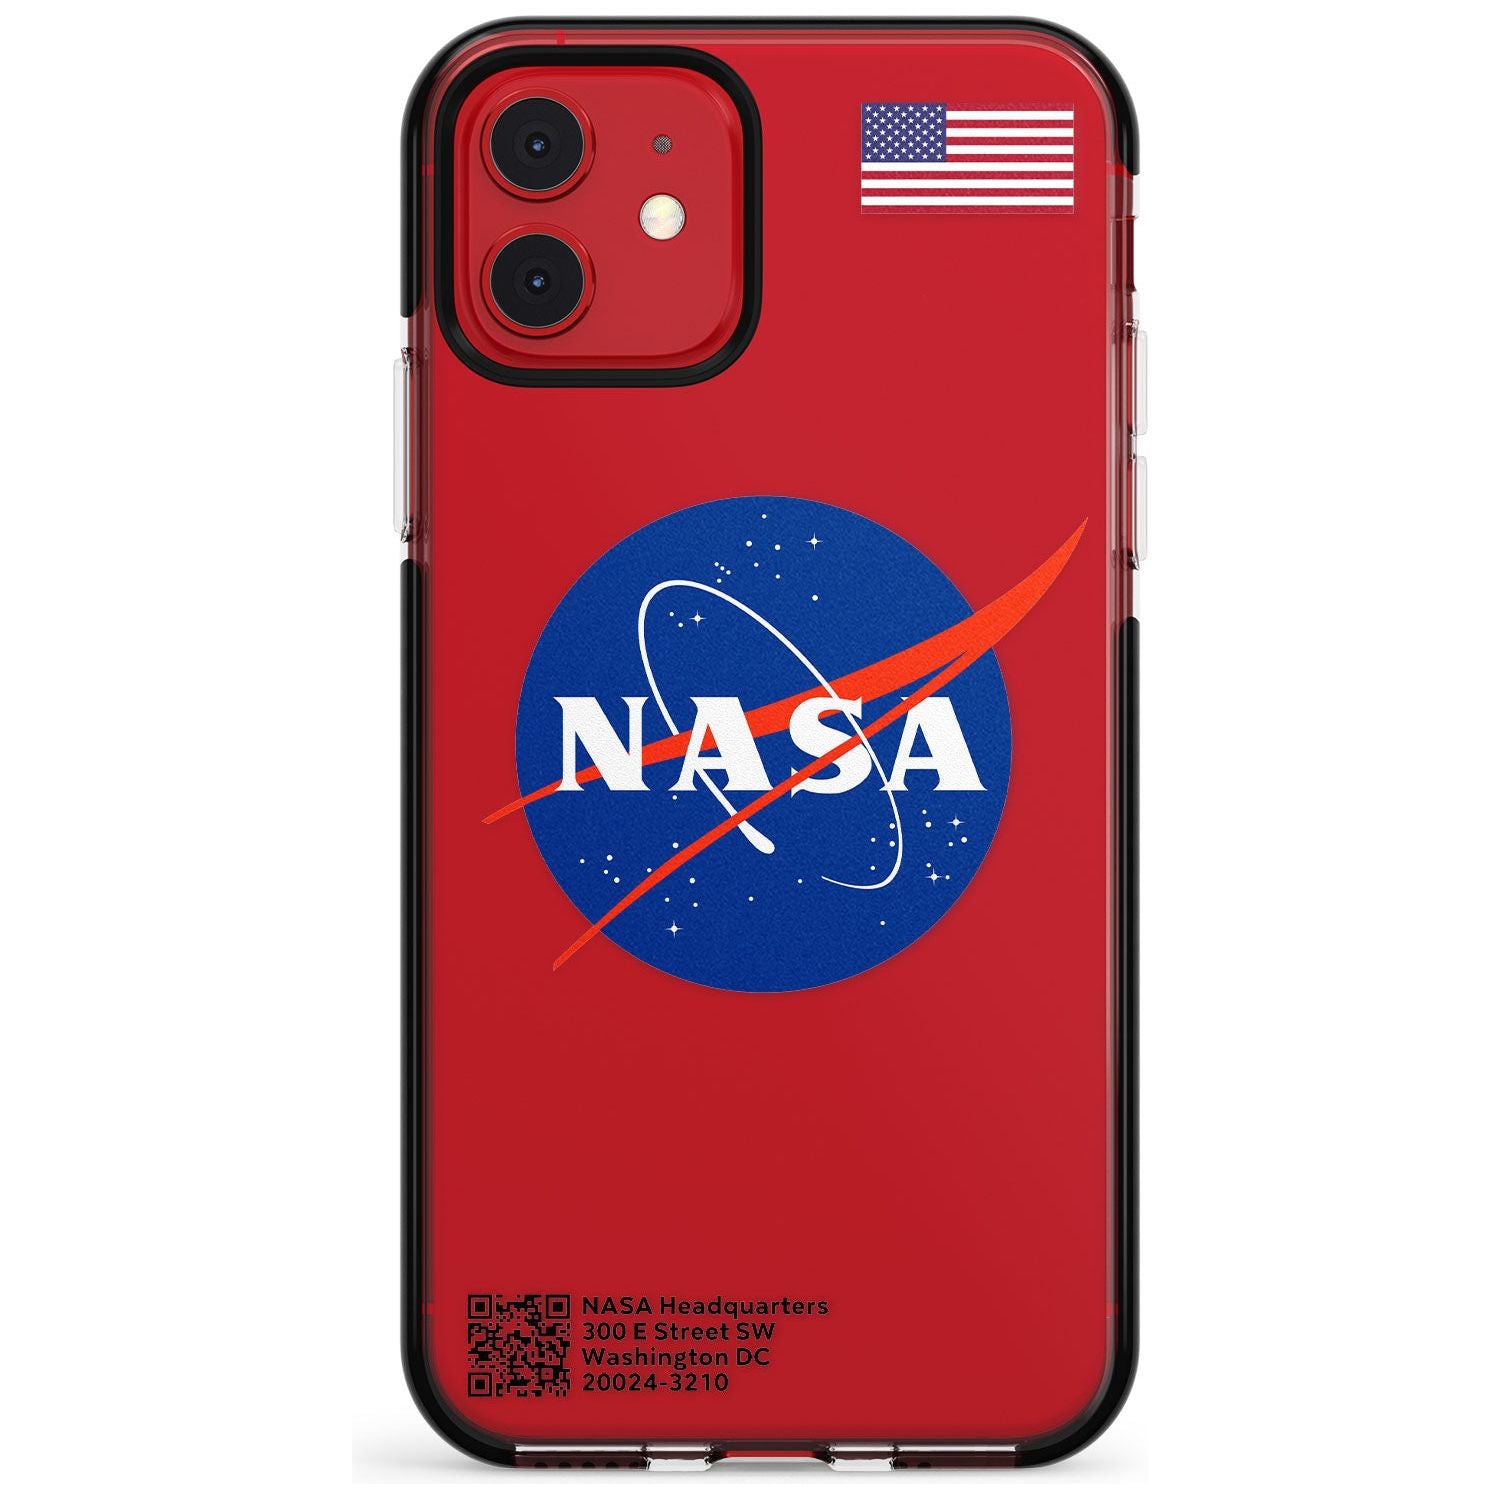 NASA Meatball Black Impact Phone Case for iPhone 11 Pro Max